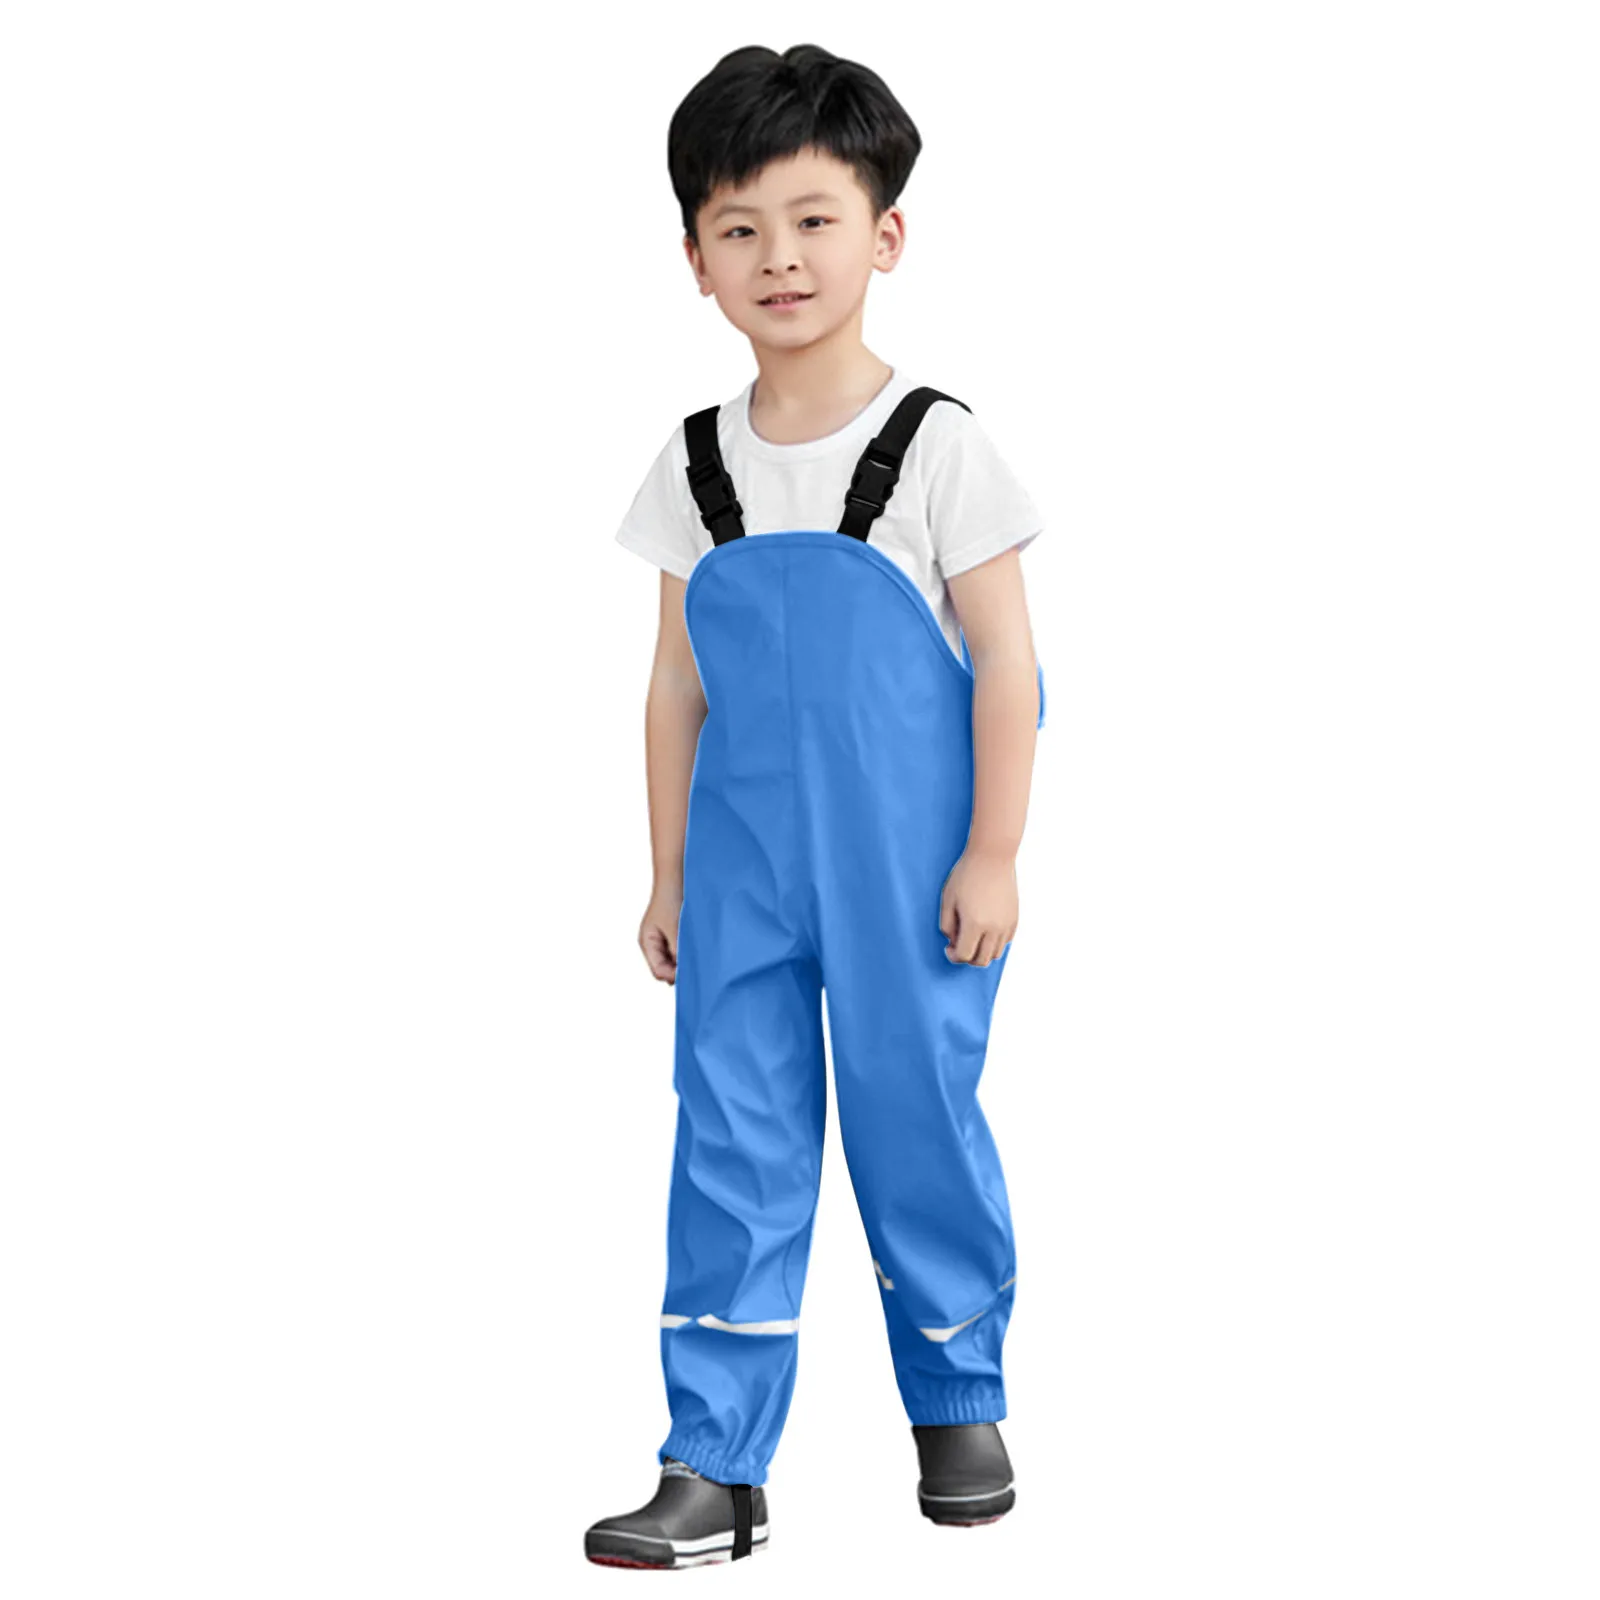 SHOPEEQ Unisex Children Rain Trousers Windproof Strap Pants Dungarees and Mudproof for Suit Boys and Girls Rainwear All in One Dry Suit for Outdoor Play 